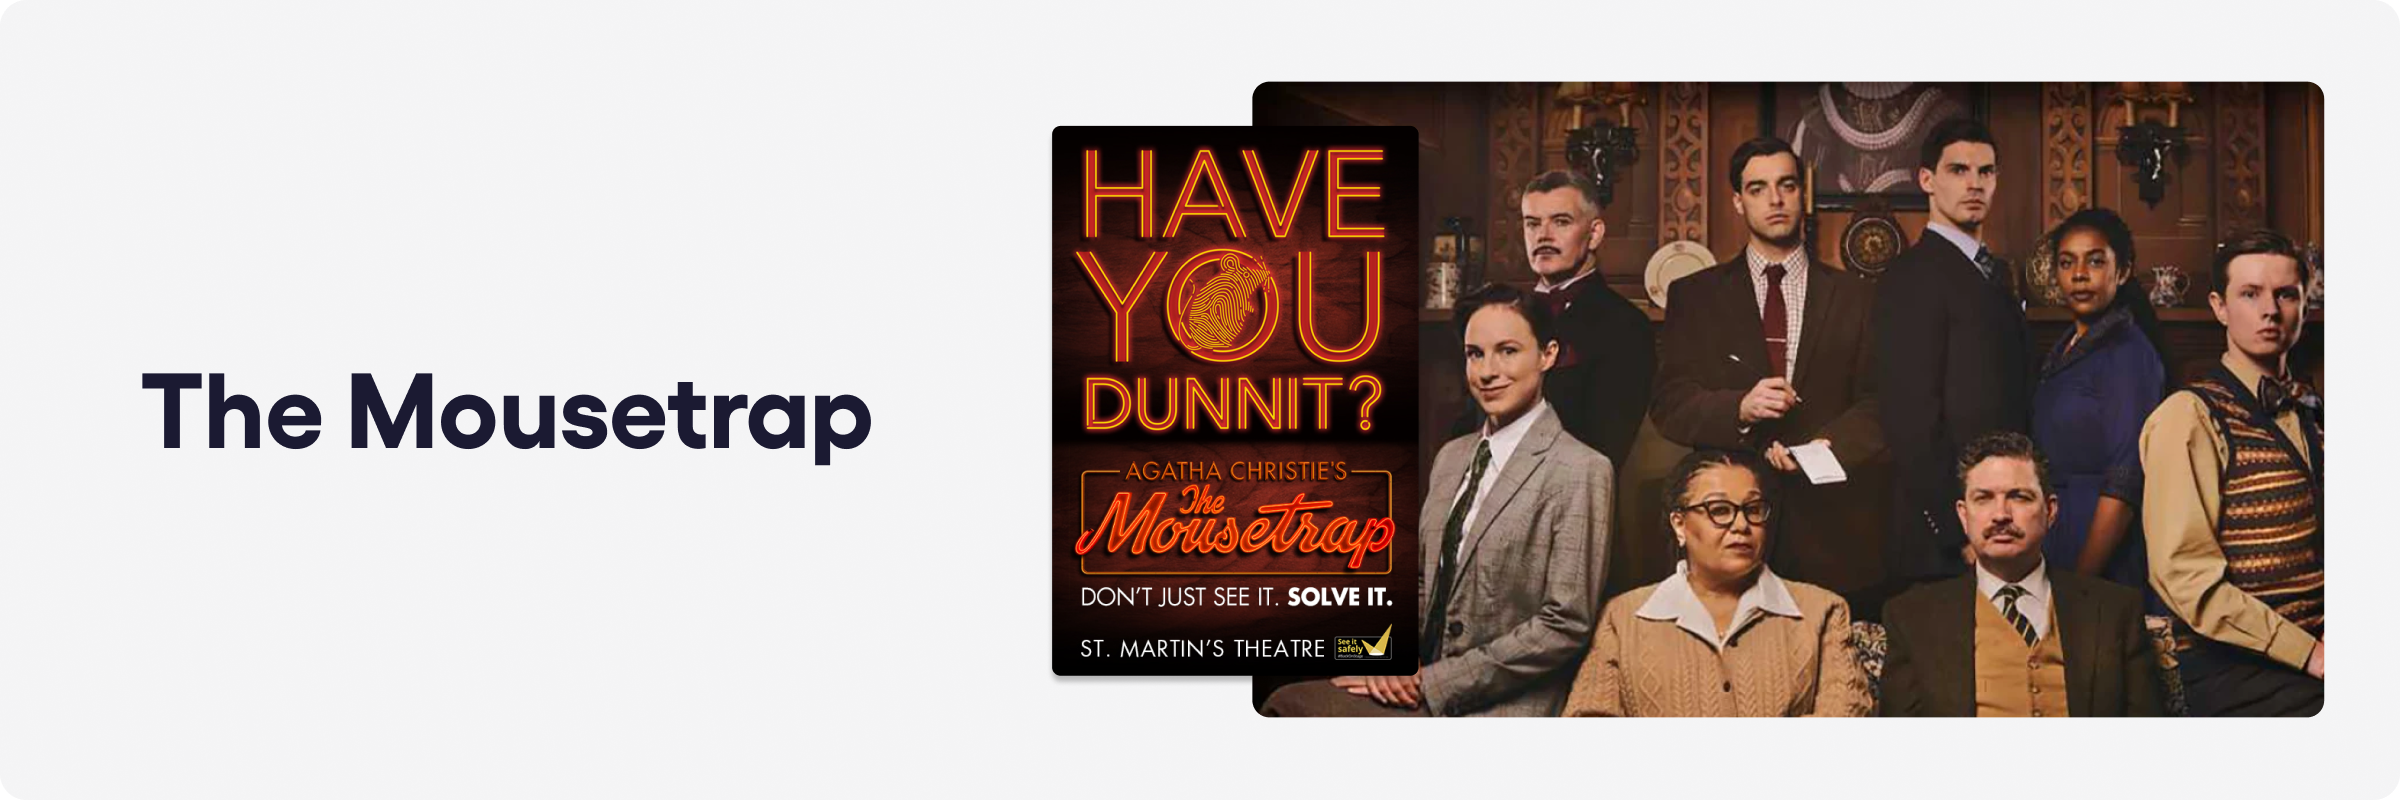 Recommended Shows - The Mousetrap